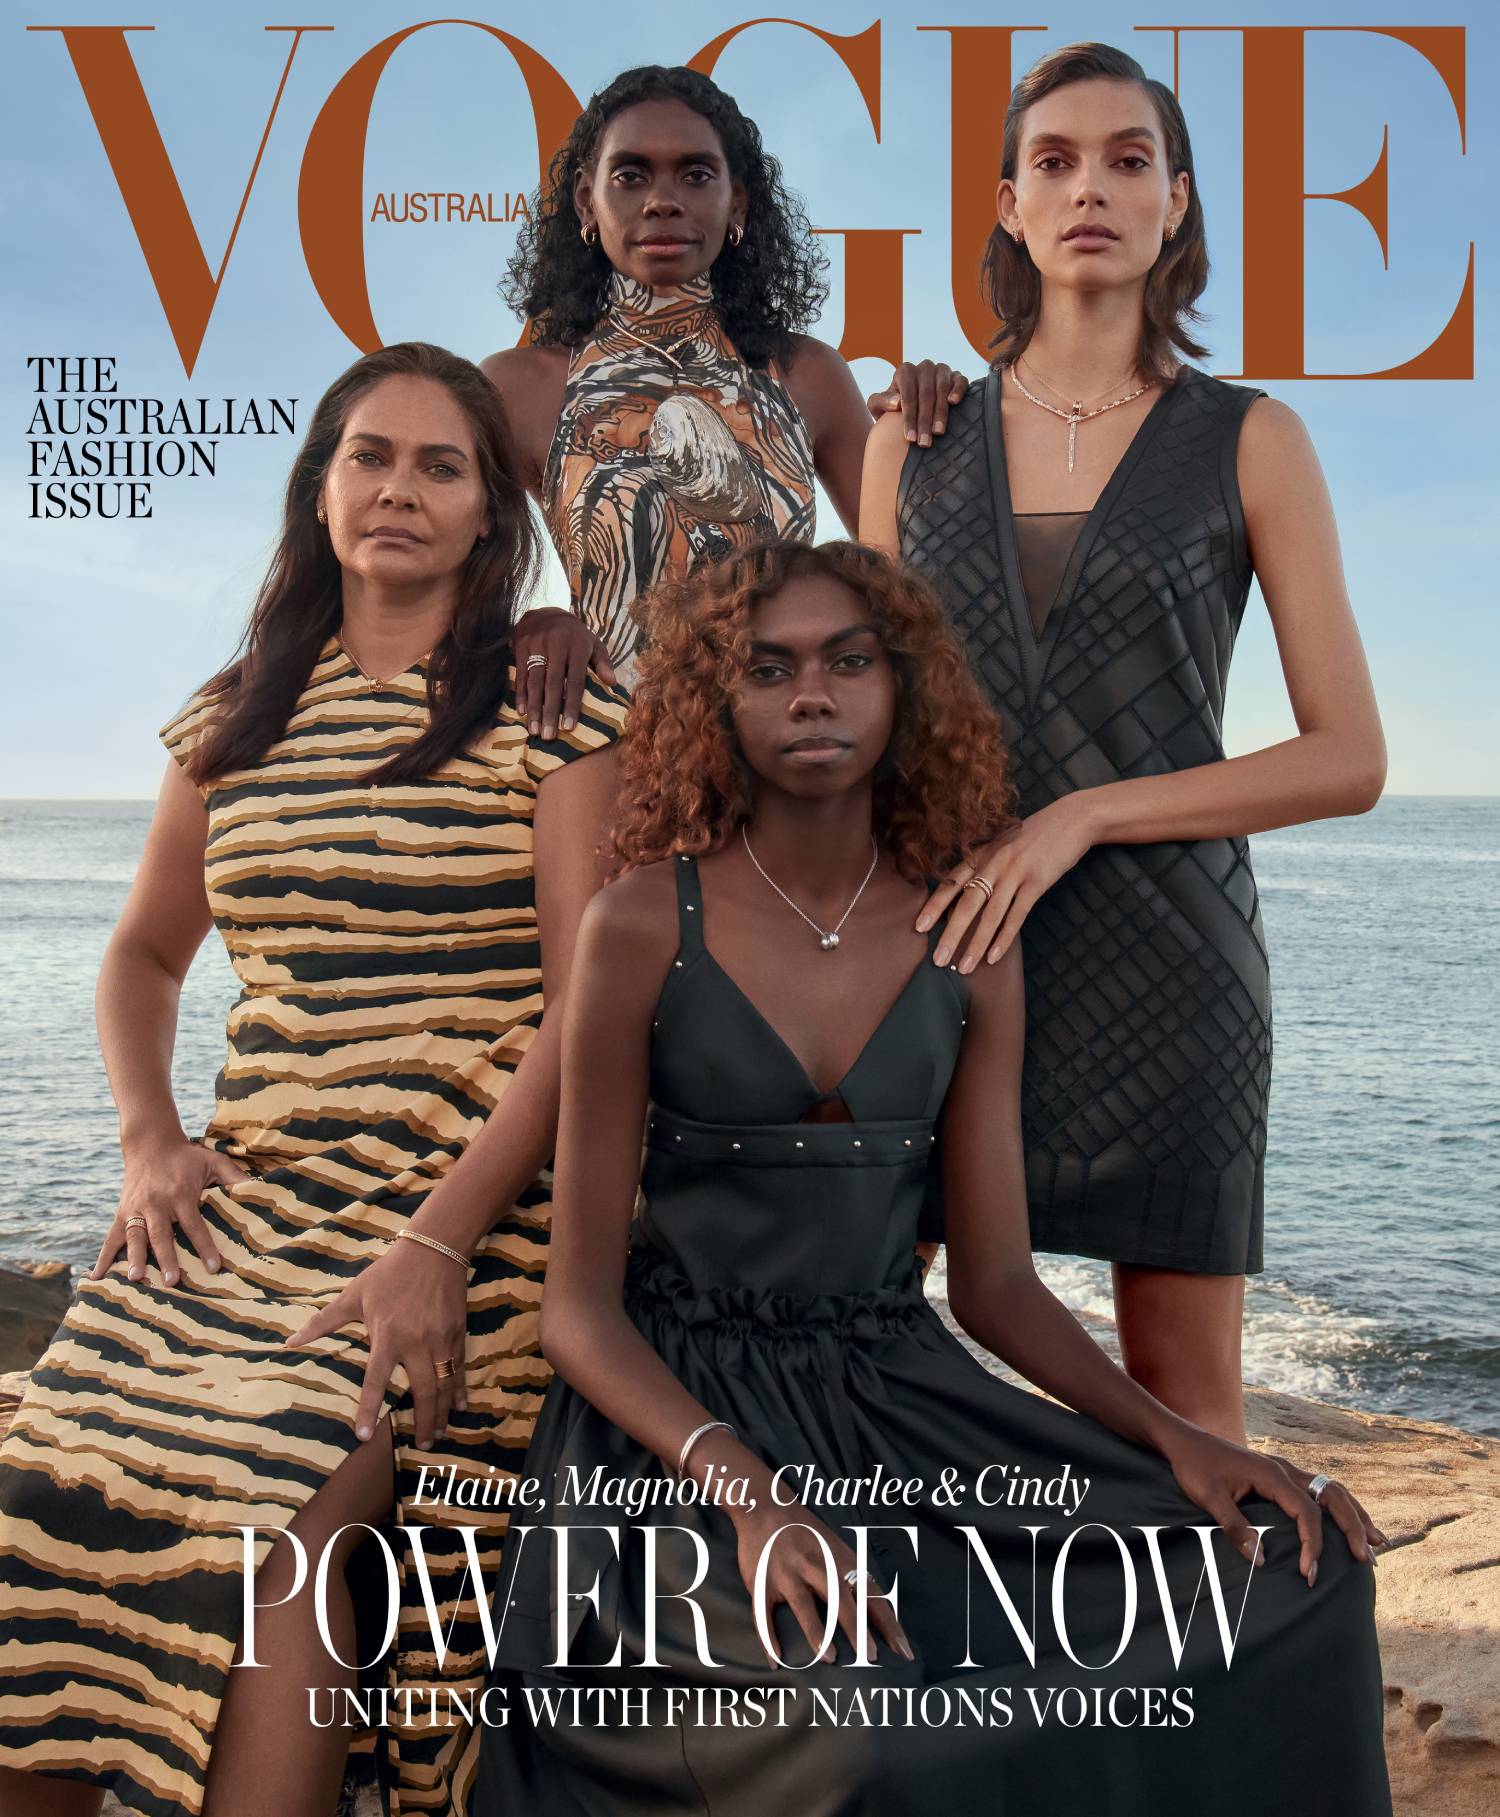 Four women posing on the front cover of a magazine